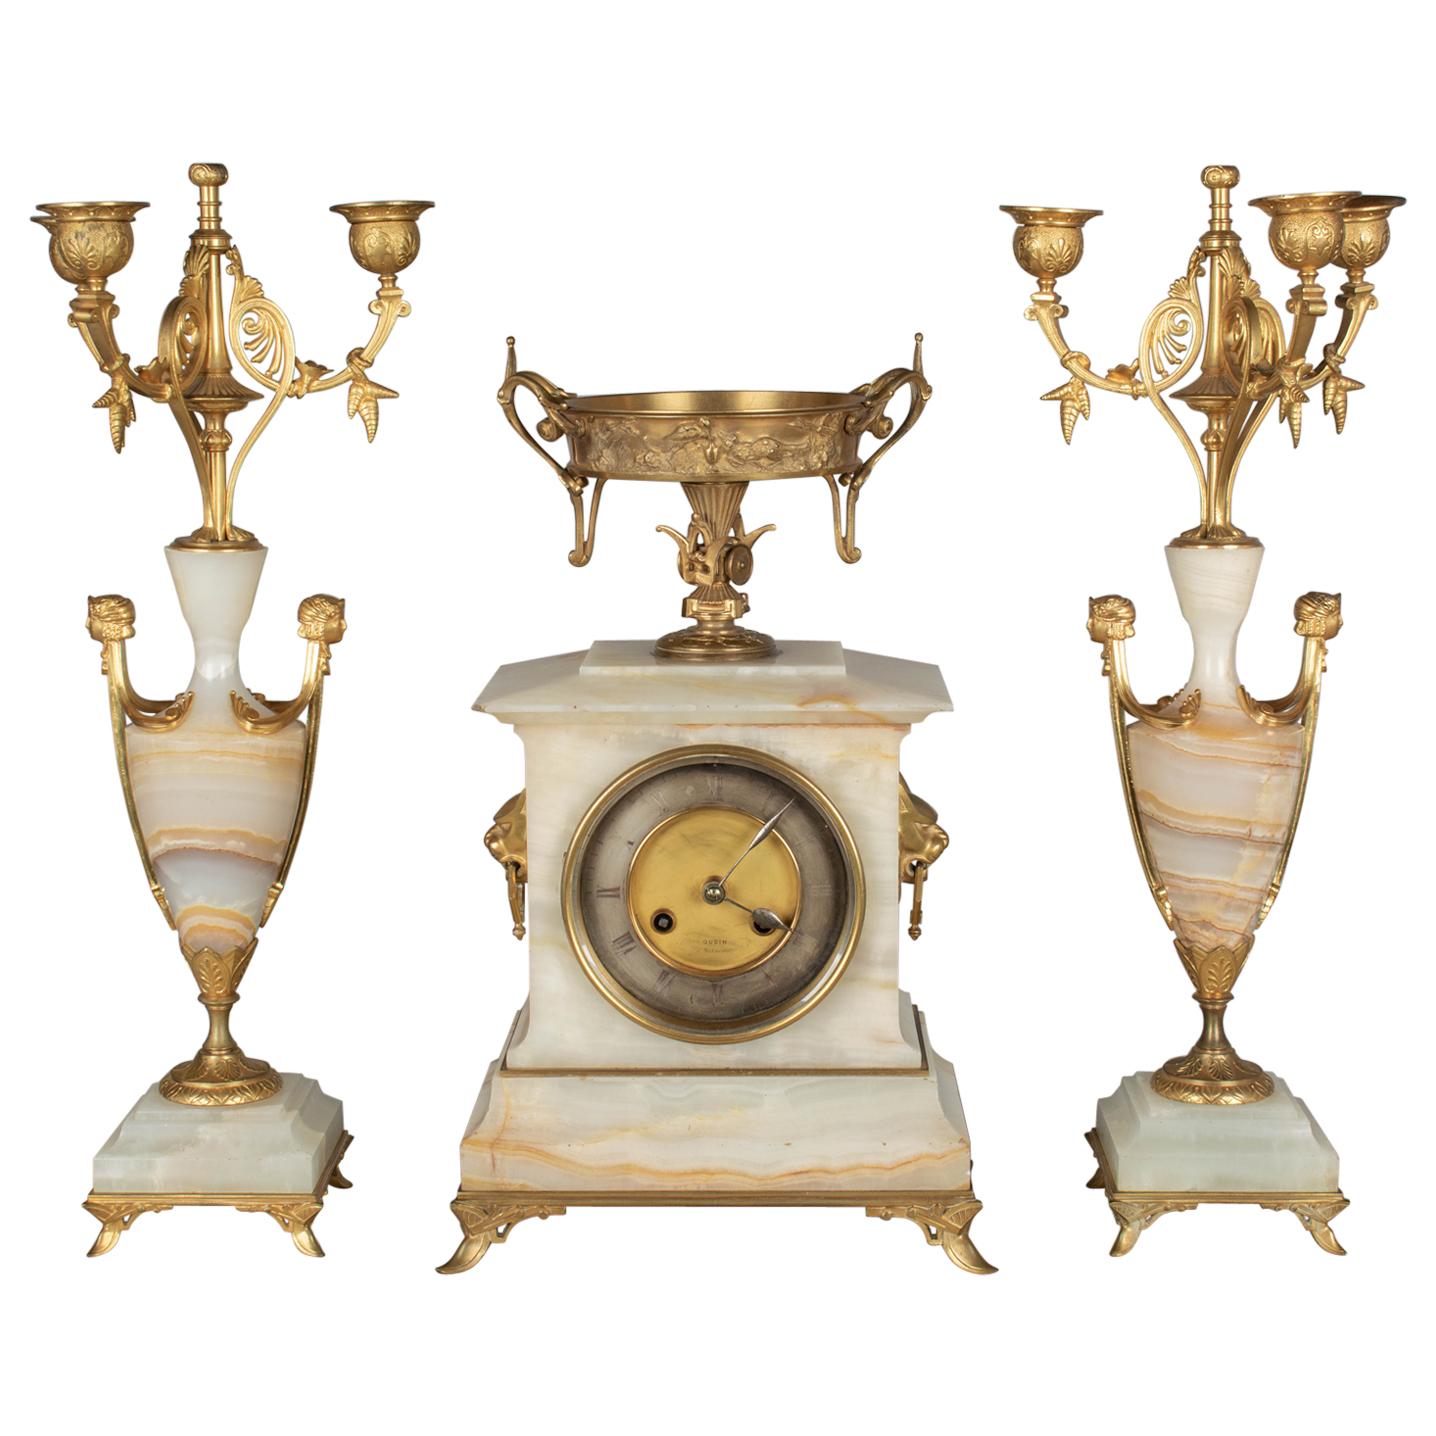 French Art Deco Mantel Clock and Candelabras